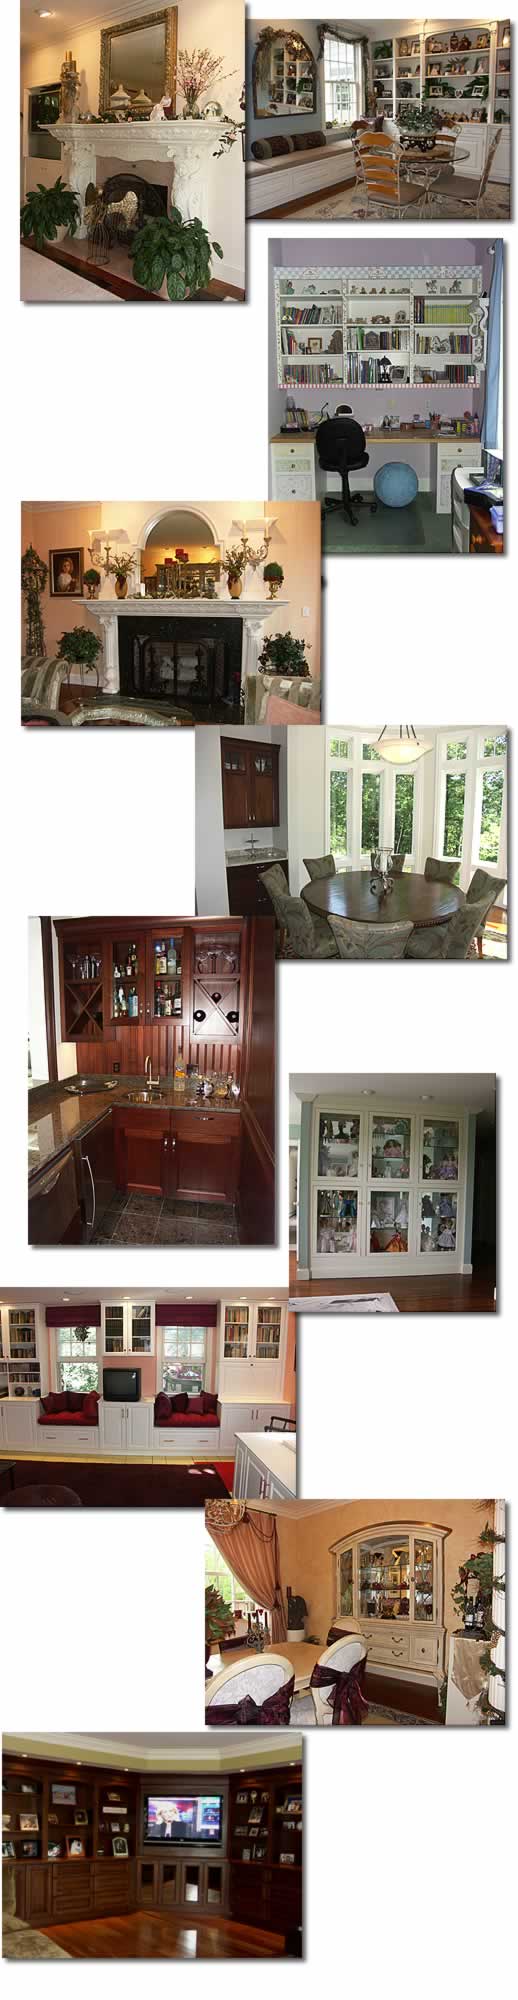 Other rooms and cabinetry